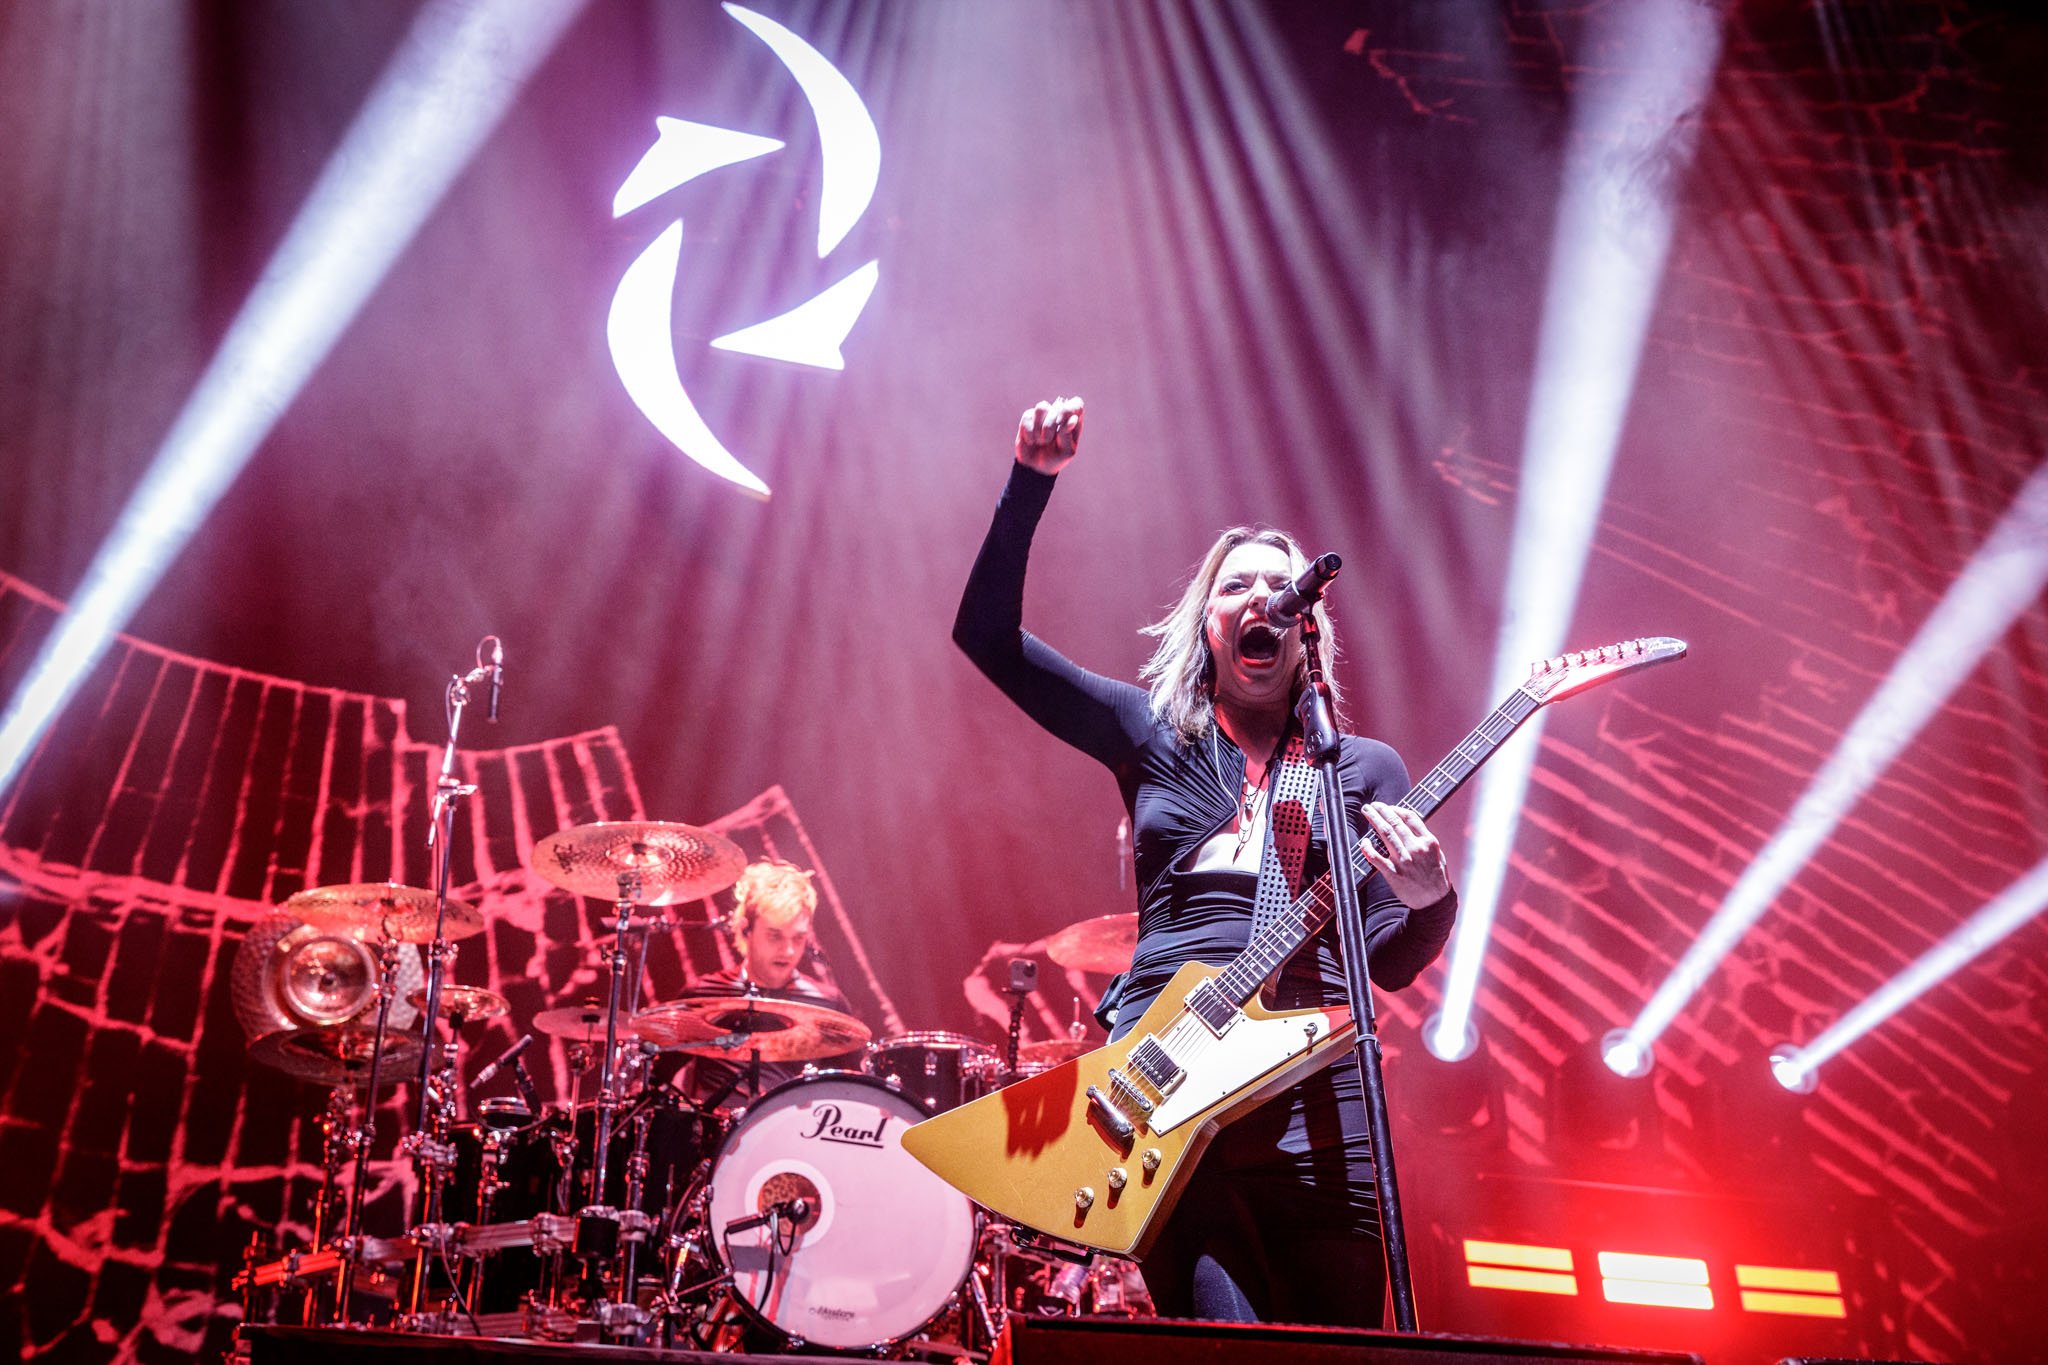 Halestorm at the AO Arena in Manchester on December 9th 2022 ©J